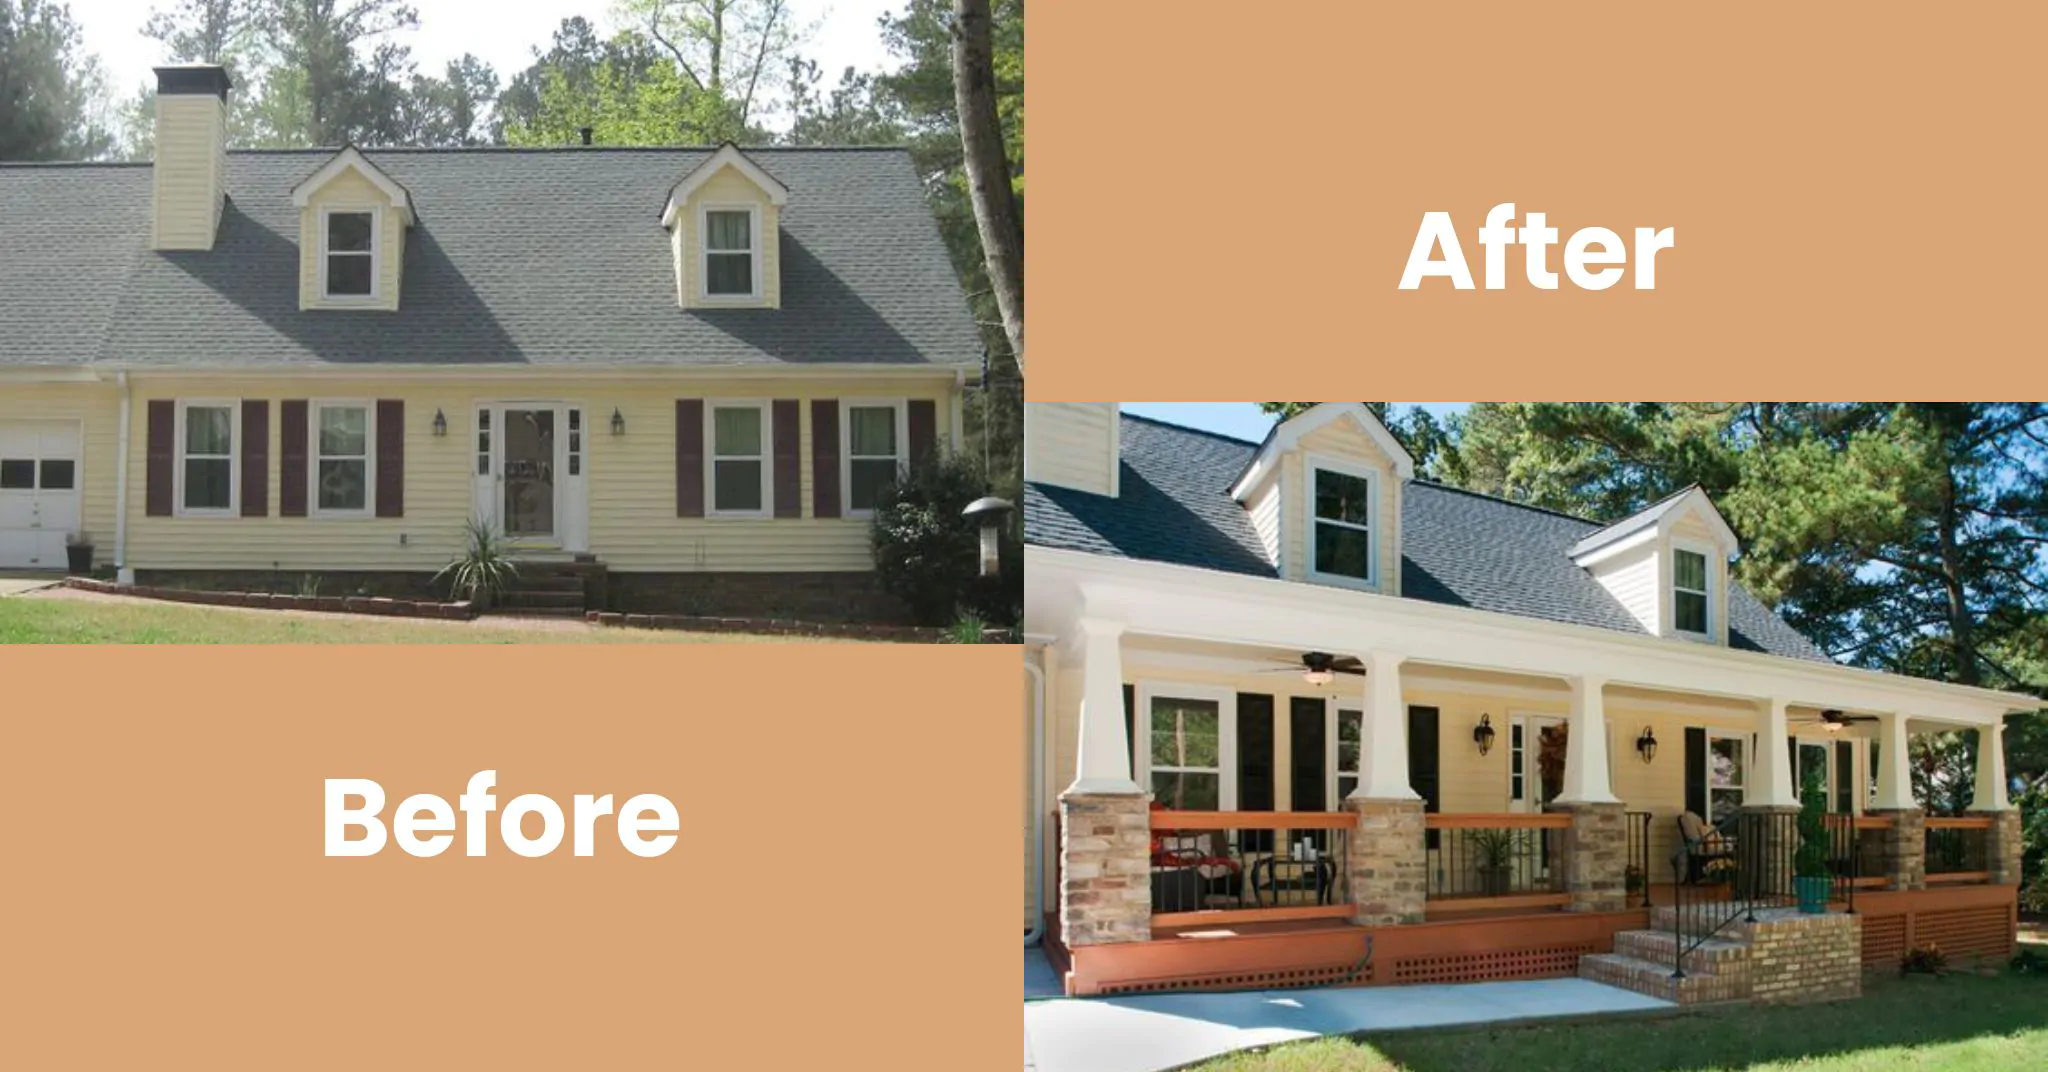 Before and After Porch Design Service - All Pro Cherry Hill Deck Builders